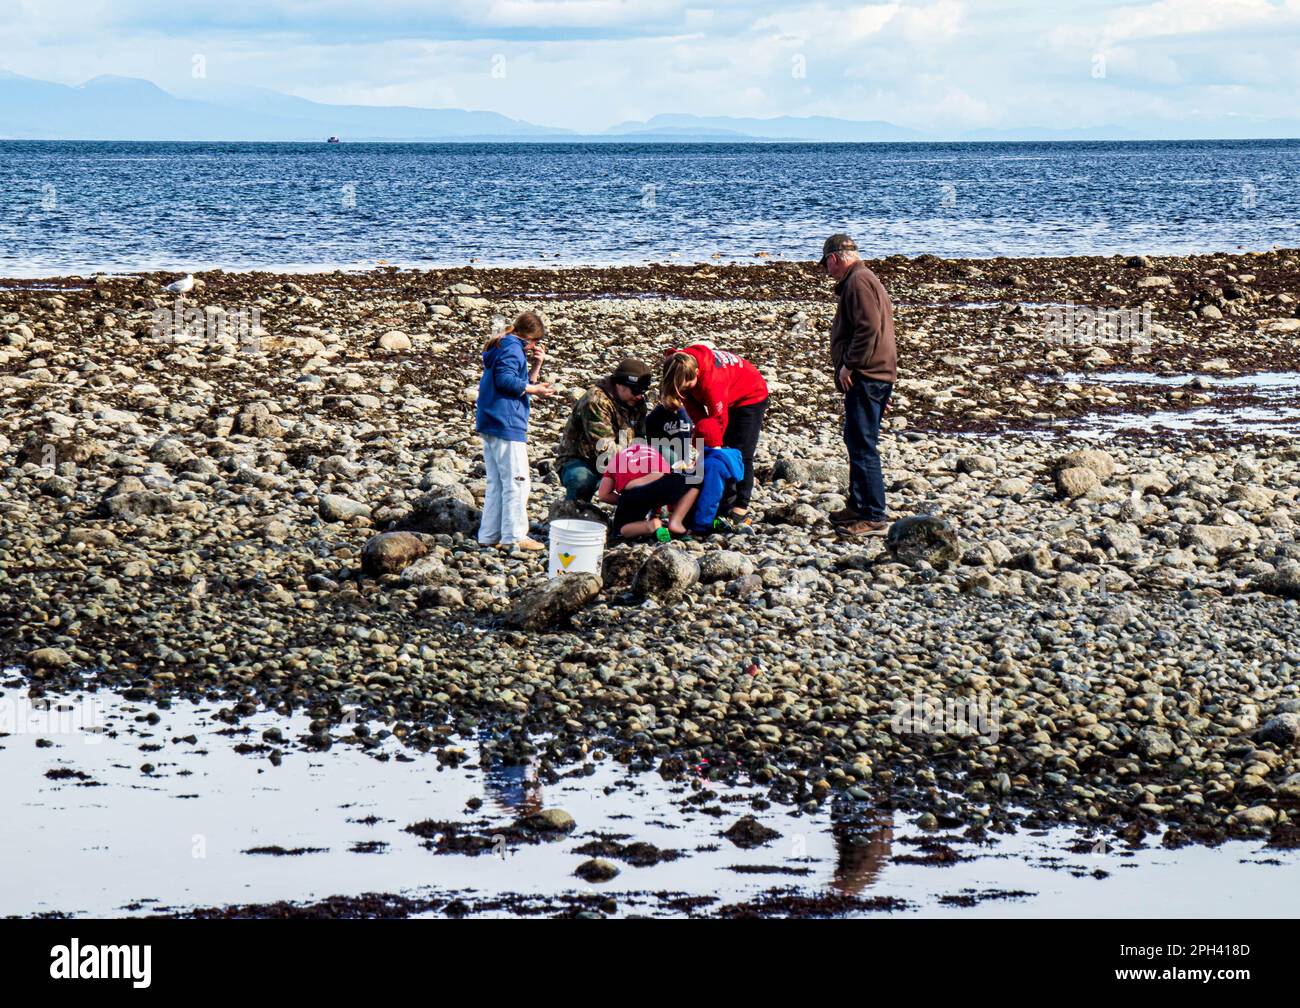 Family enjoying the beach at low tide, looking at tidal pools at spring break.  Sunny day, rocky beach. Stock Photo